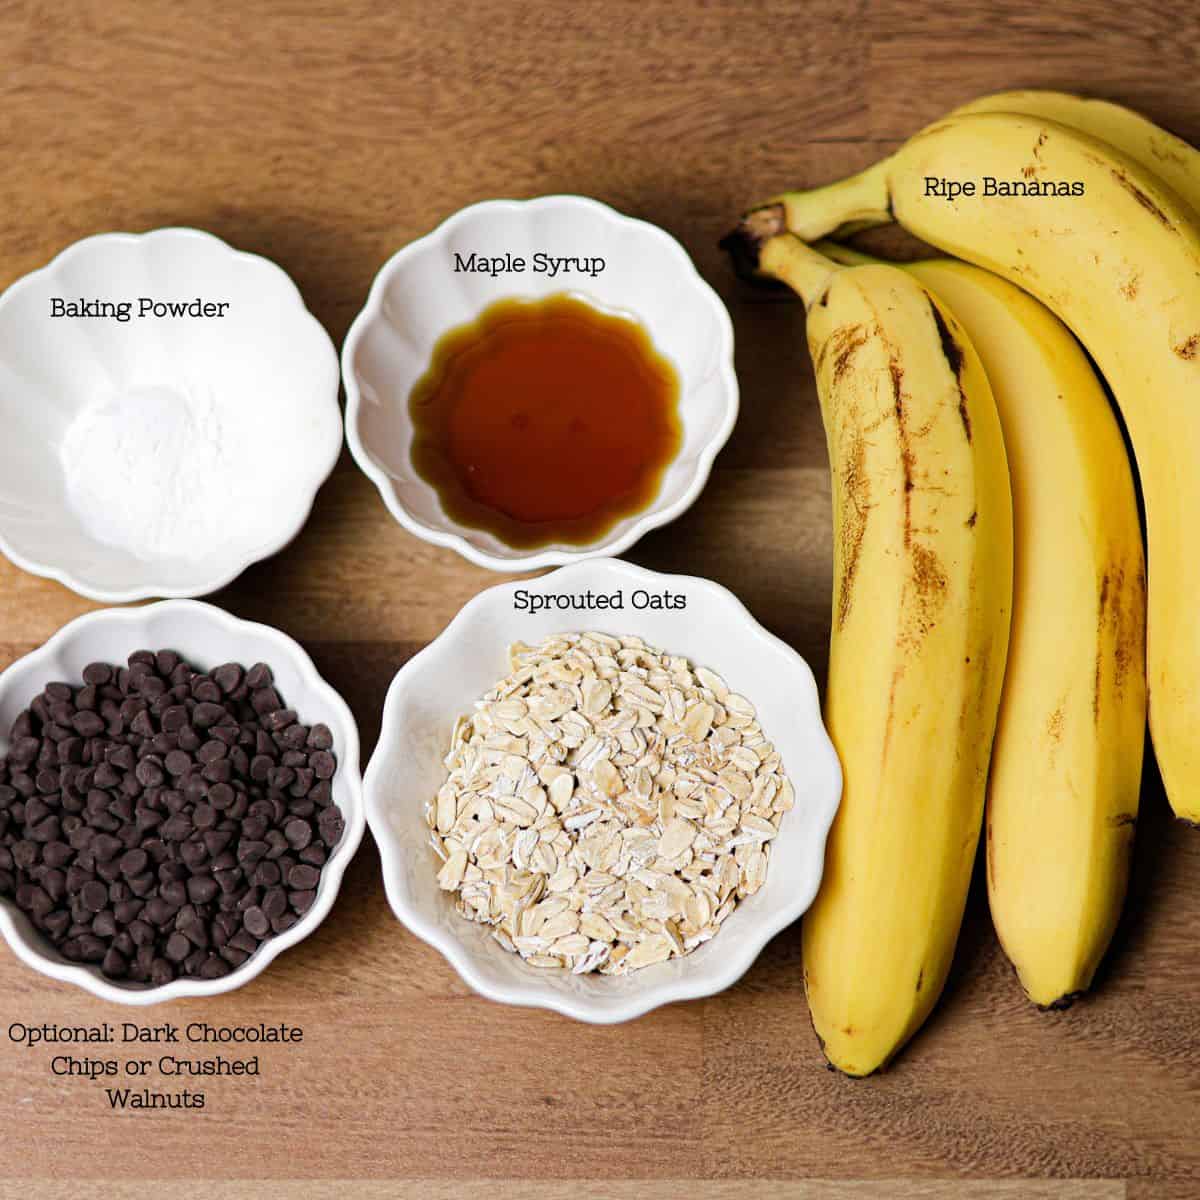 Ingredients for 4 Ingredient Sprouted Oat Banana Bread laid out on a wooden surface, including ripe bananas, sprouted oats, baking powder, and maple syrup, with optional dark chocolate chips or crushed walnuts.